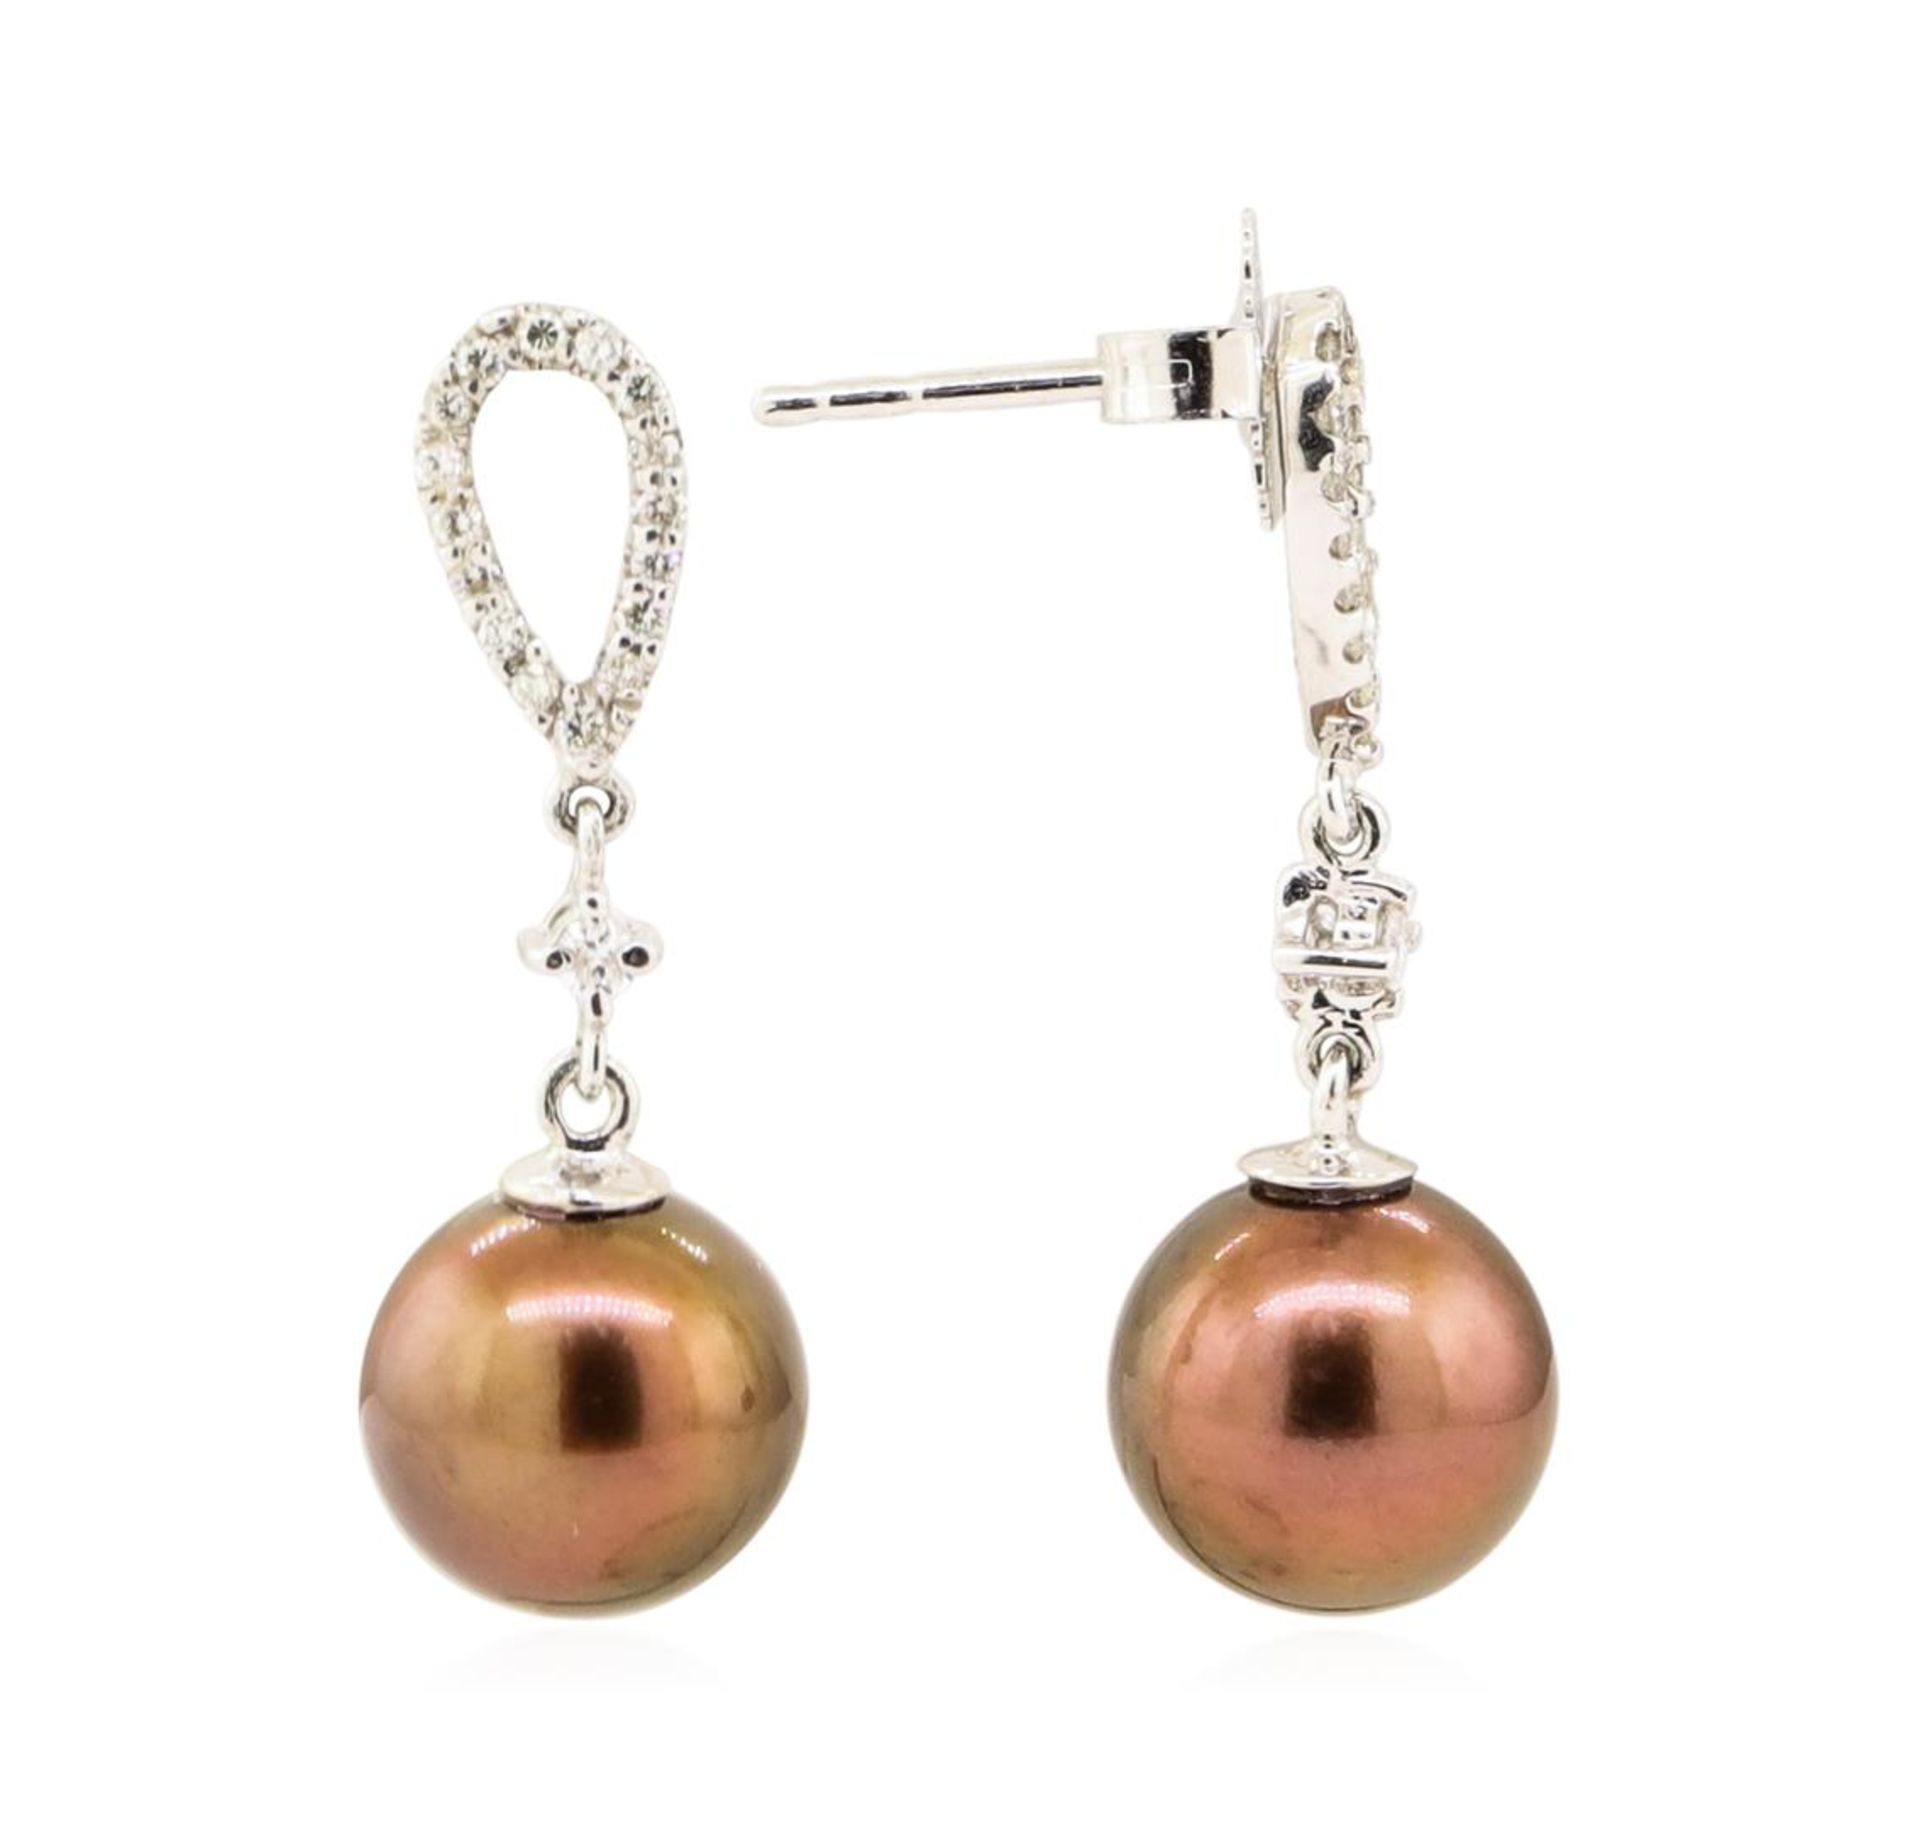 0.30 ctw Diamond and Chocolate Pearl Dangle Earrings - 14KT White Gold - Image 2 of 2